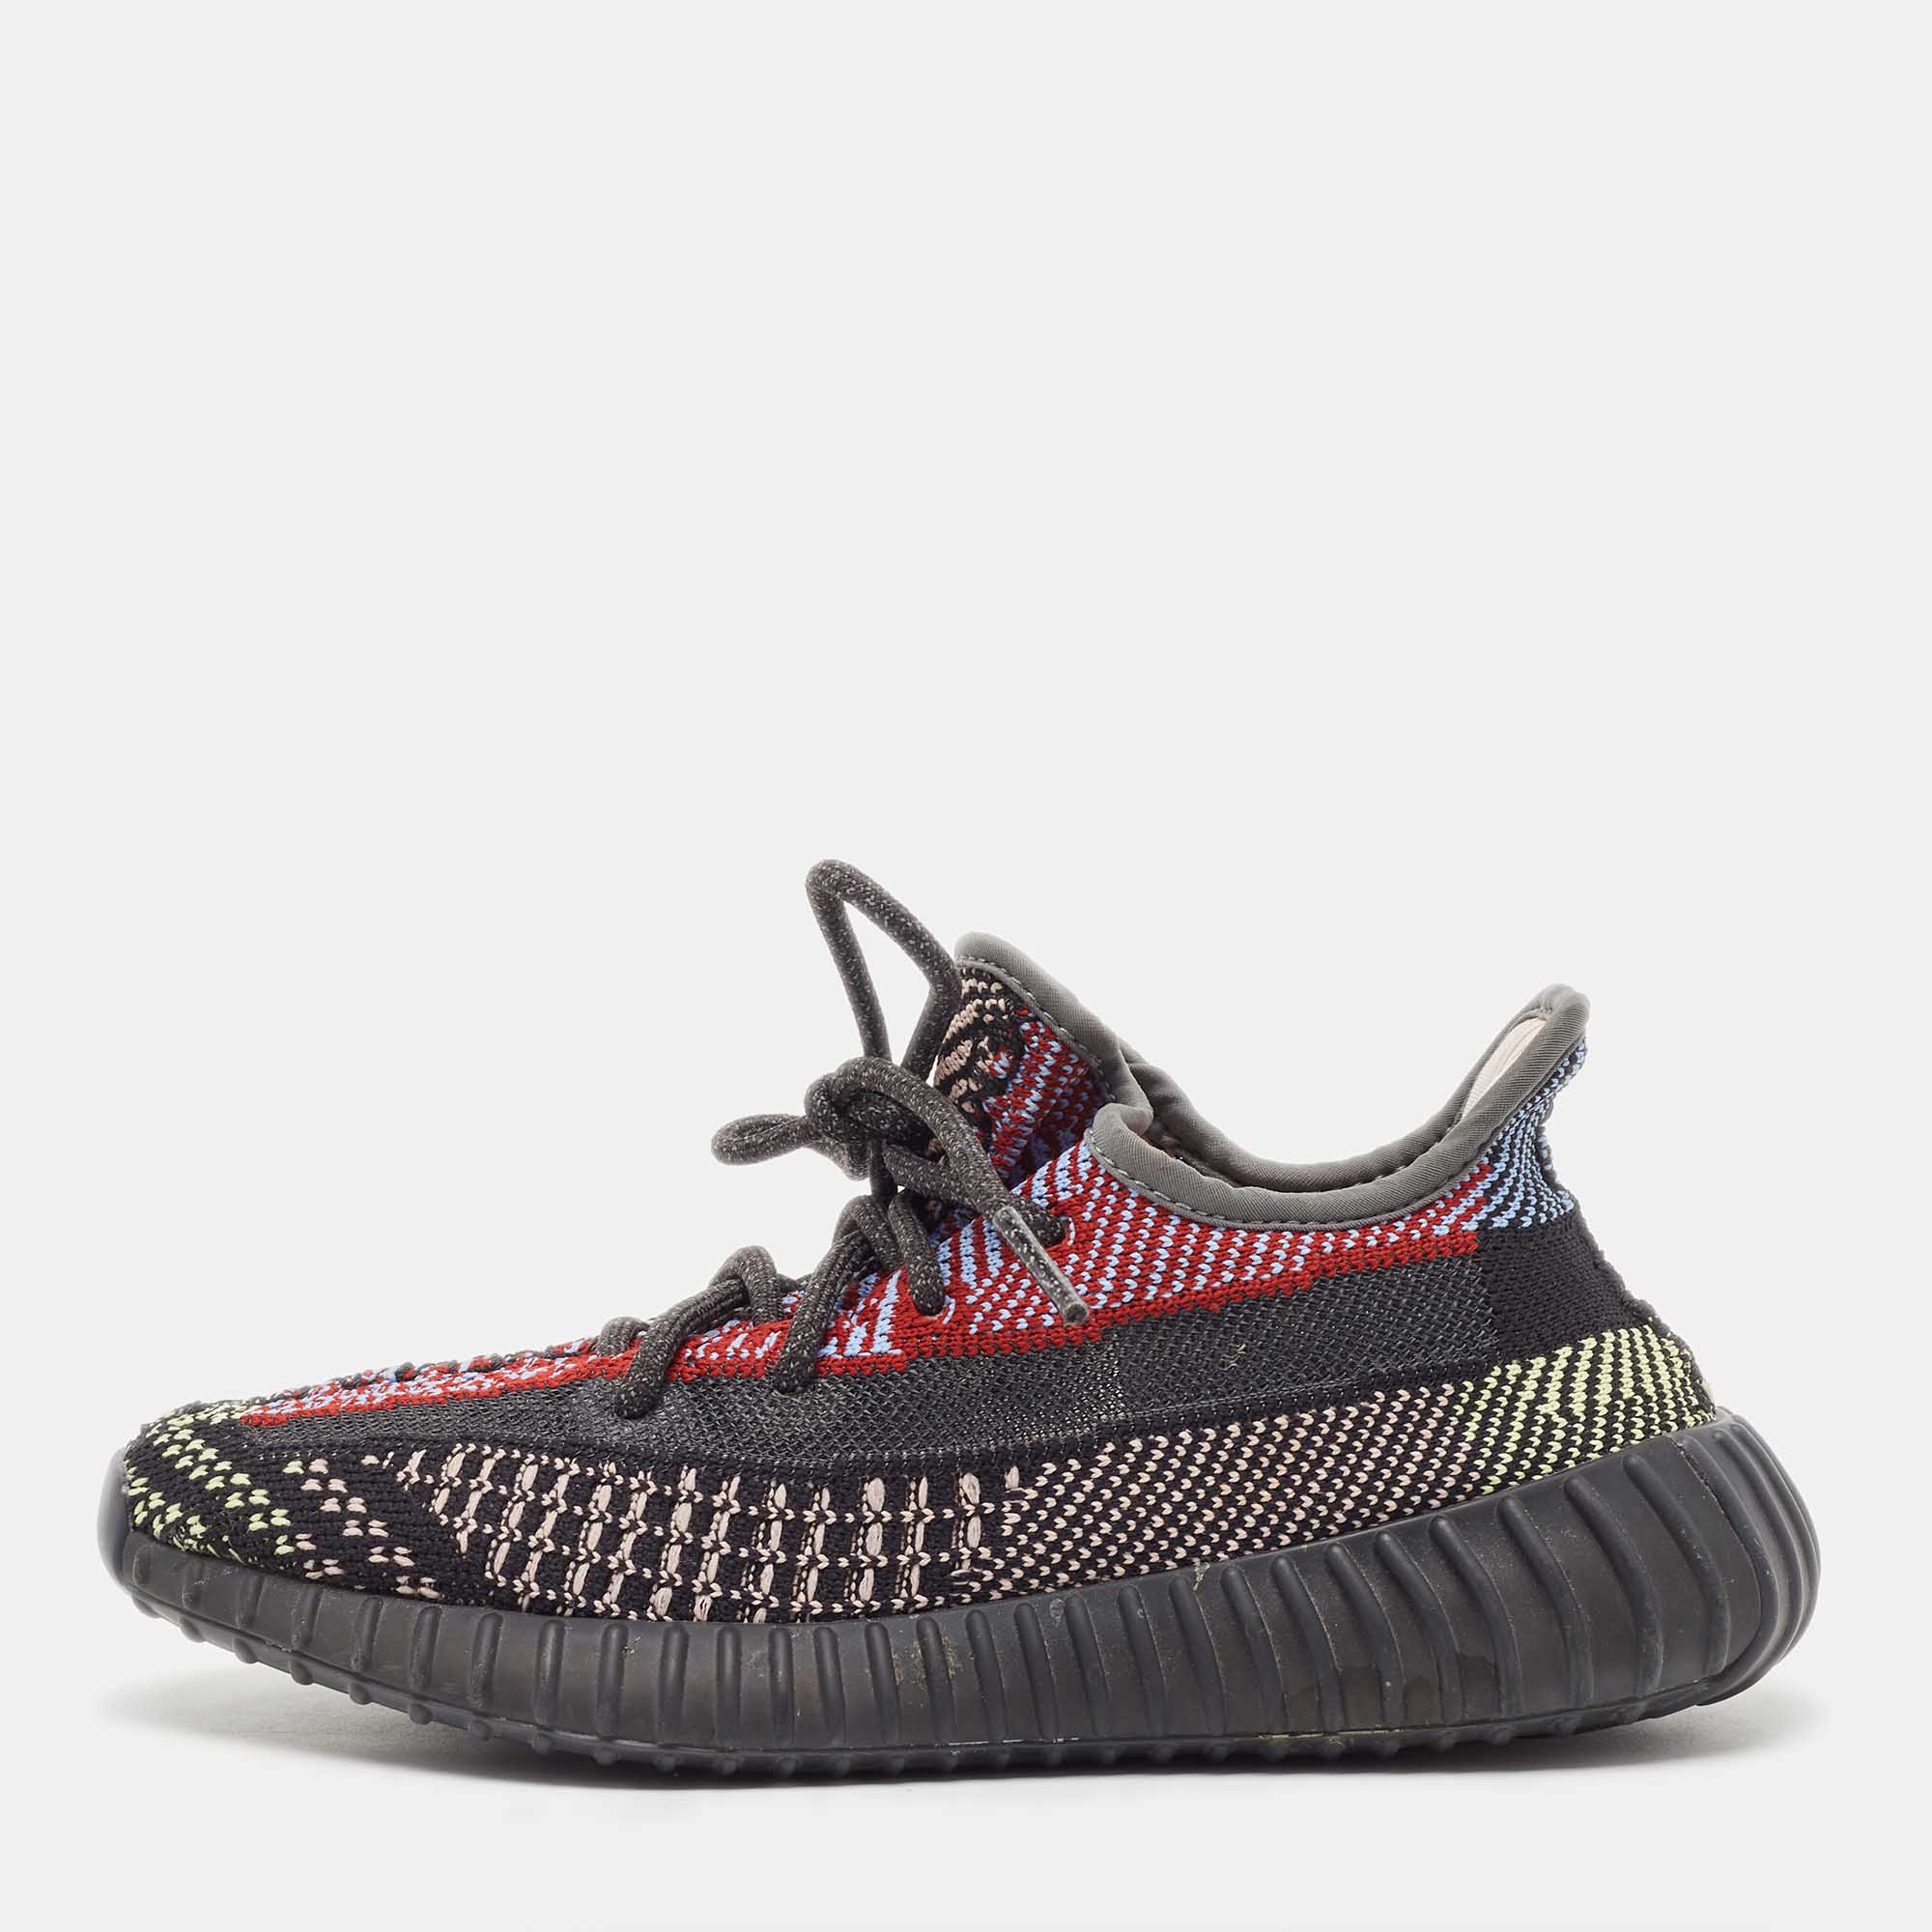 Pre-owned Yeezy X Adidas Multicolor Knit Fabric Boost 350 V2 Yecheil (non-reflective) Sneakers Size 38 In Black